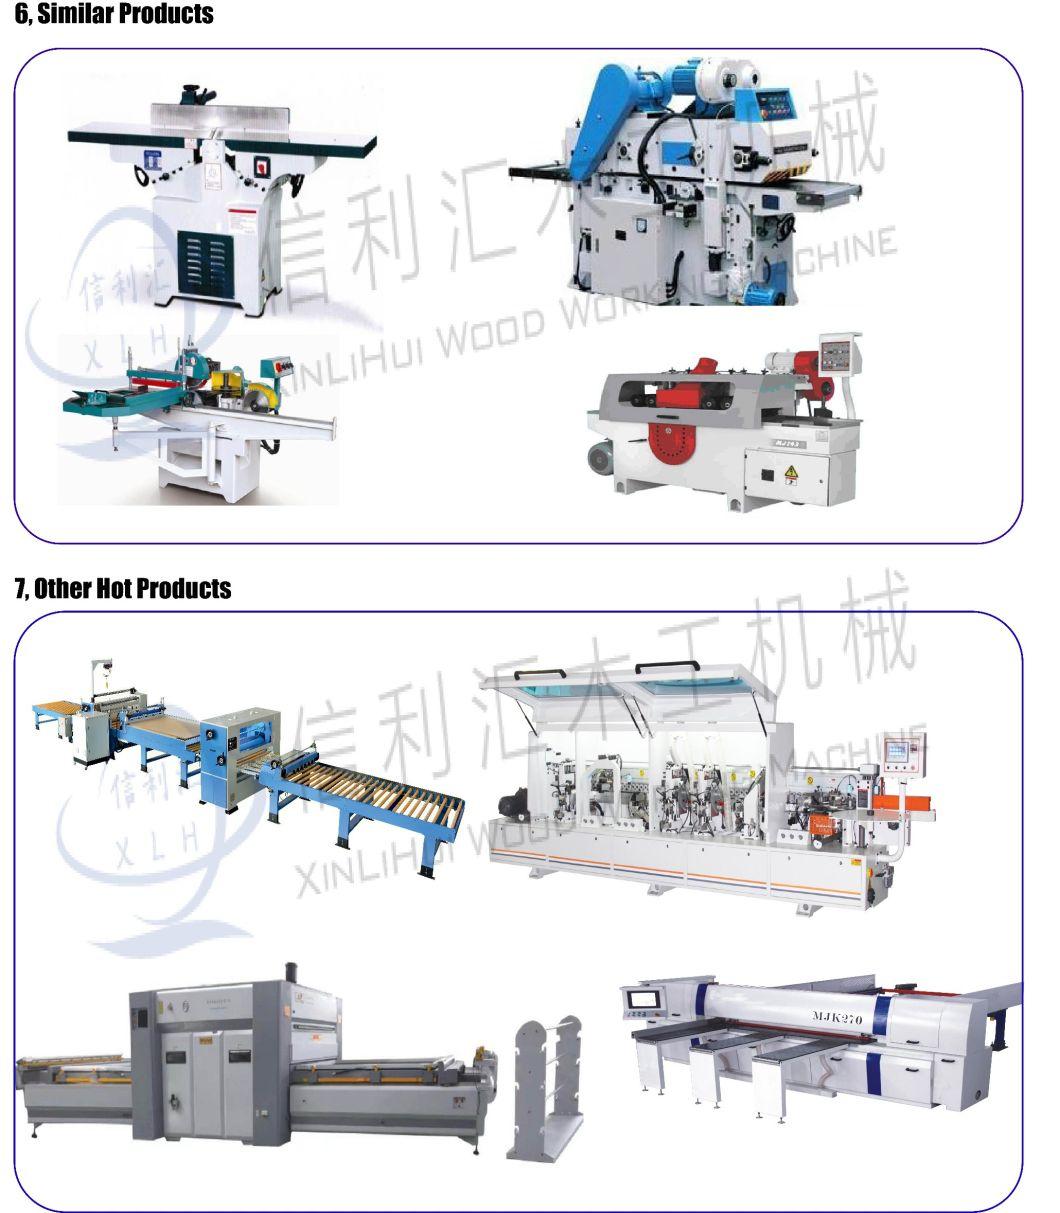 Little Size Home Use Manual Wood Working Instrument Small Machines/ High Speed Spindle Moulder Wood Shaper Machine/ Woodworking Router Table Made in China